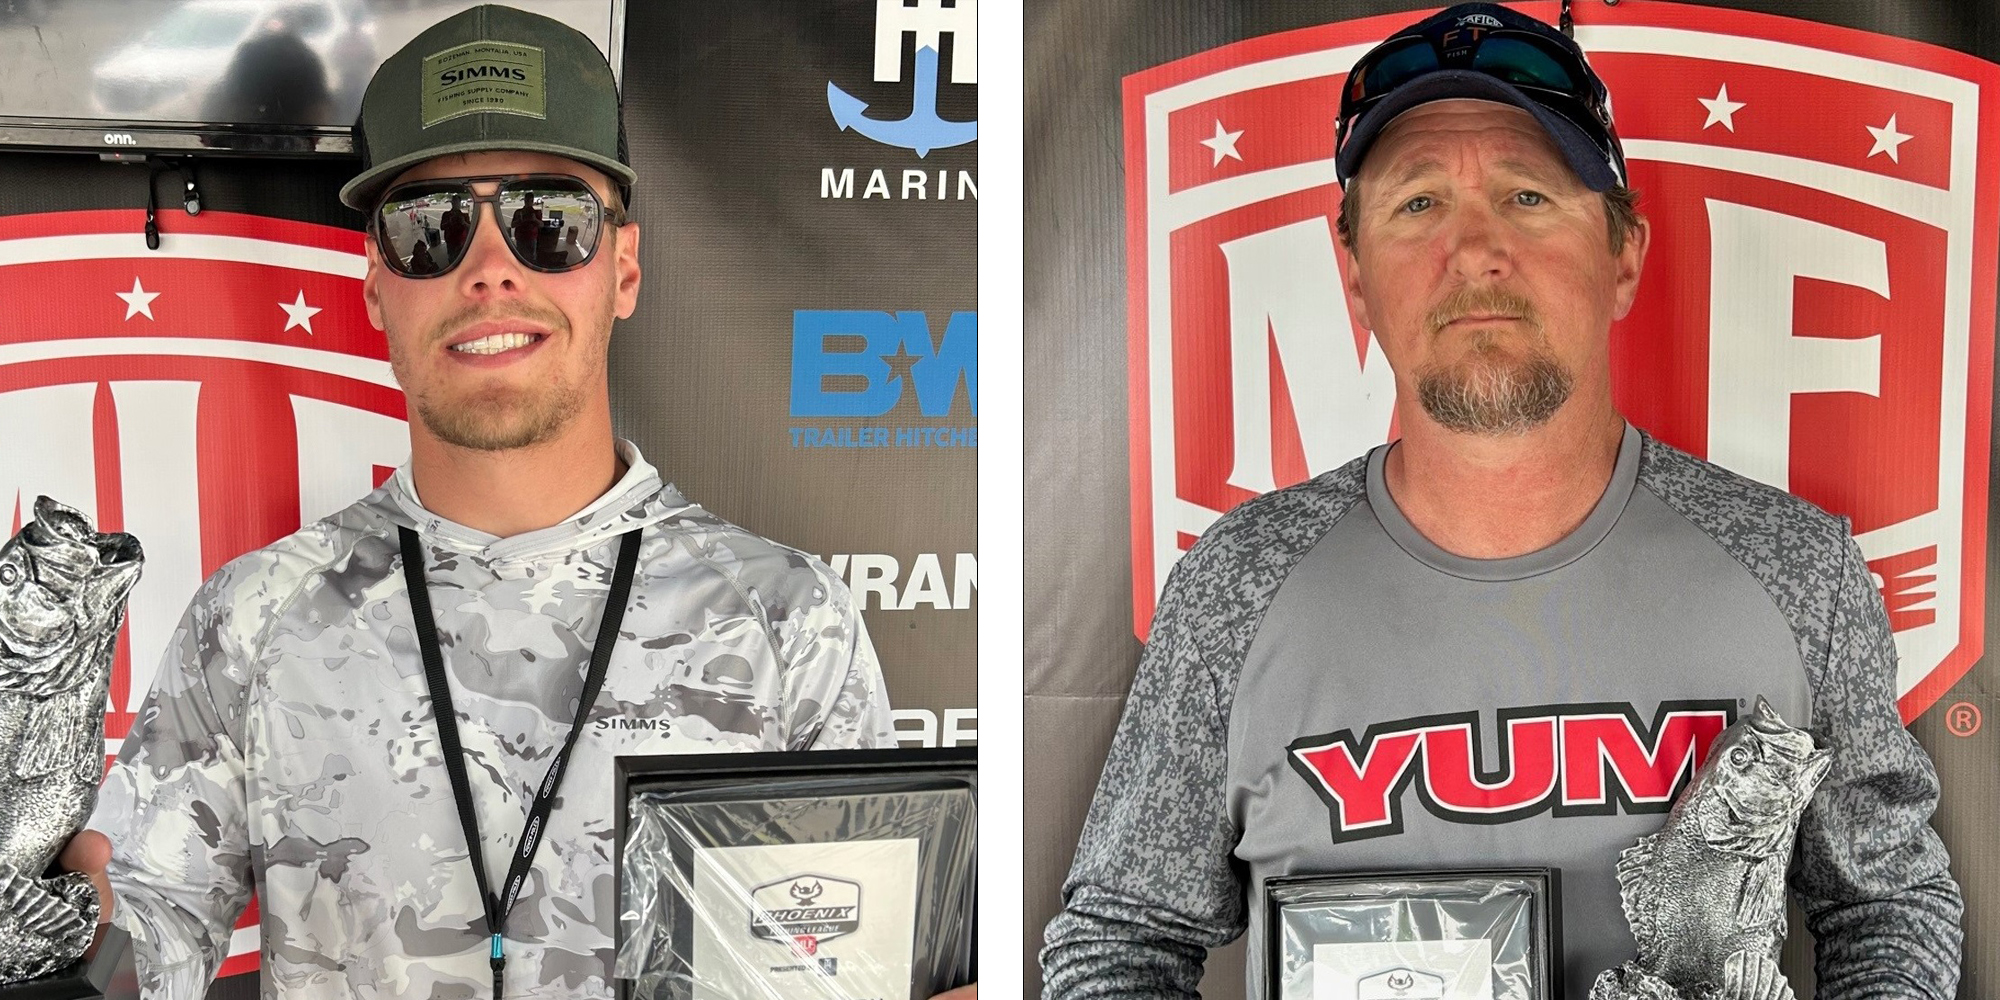 Former college angler Bryce Boatright earns win in first solo event at  Phoenix Bass Fishing League Event at Lake Hamilton - Major League Fishing